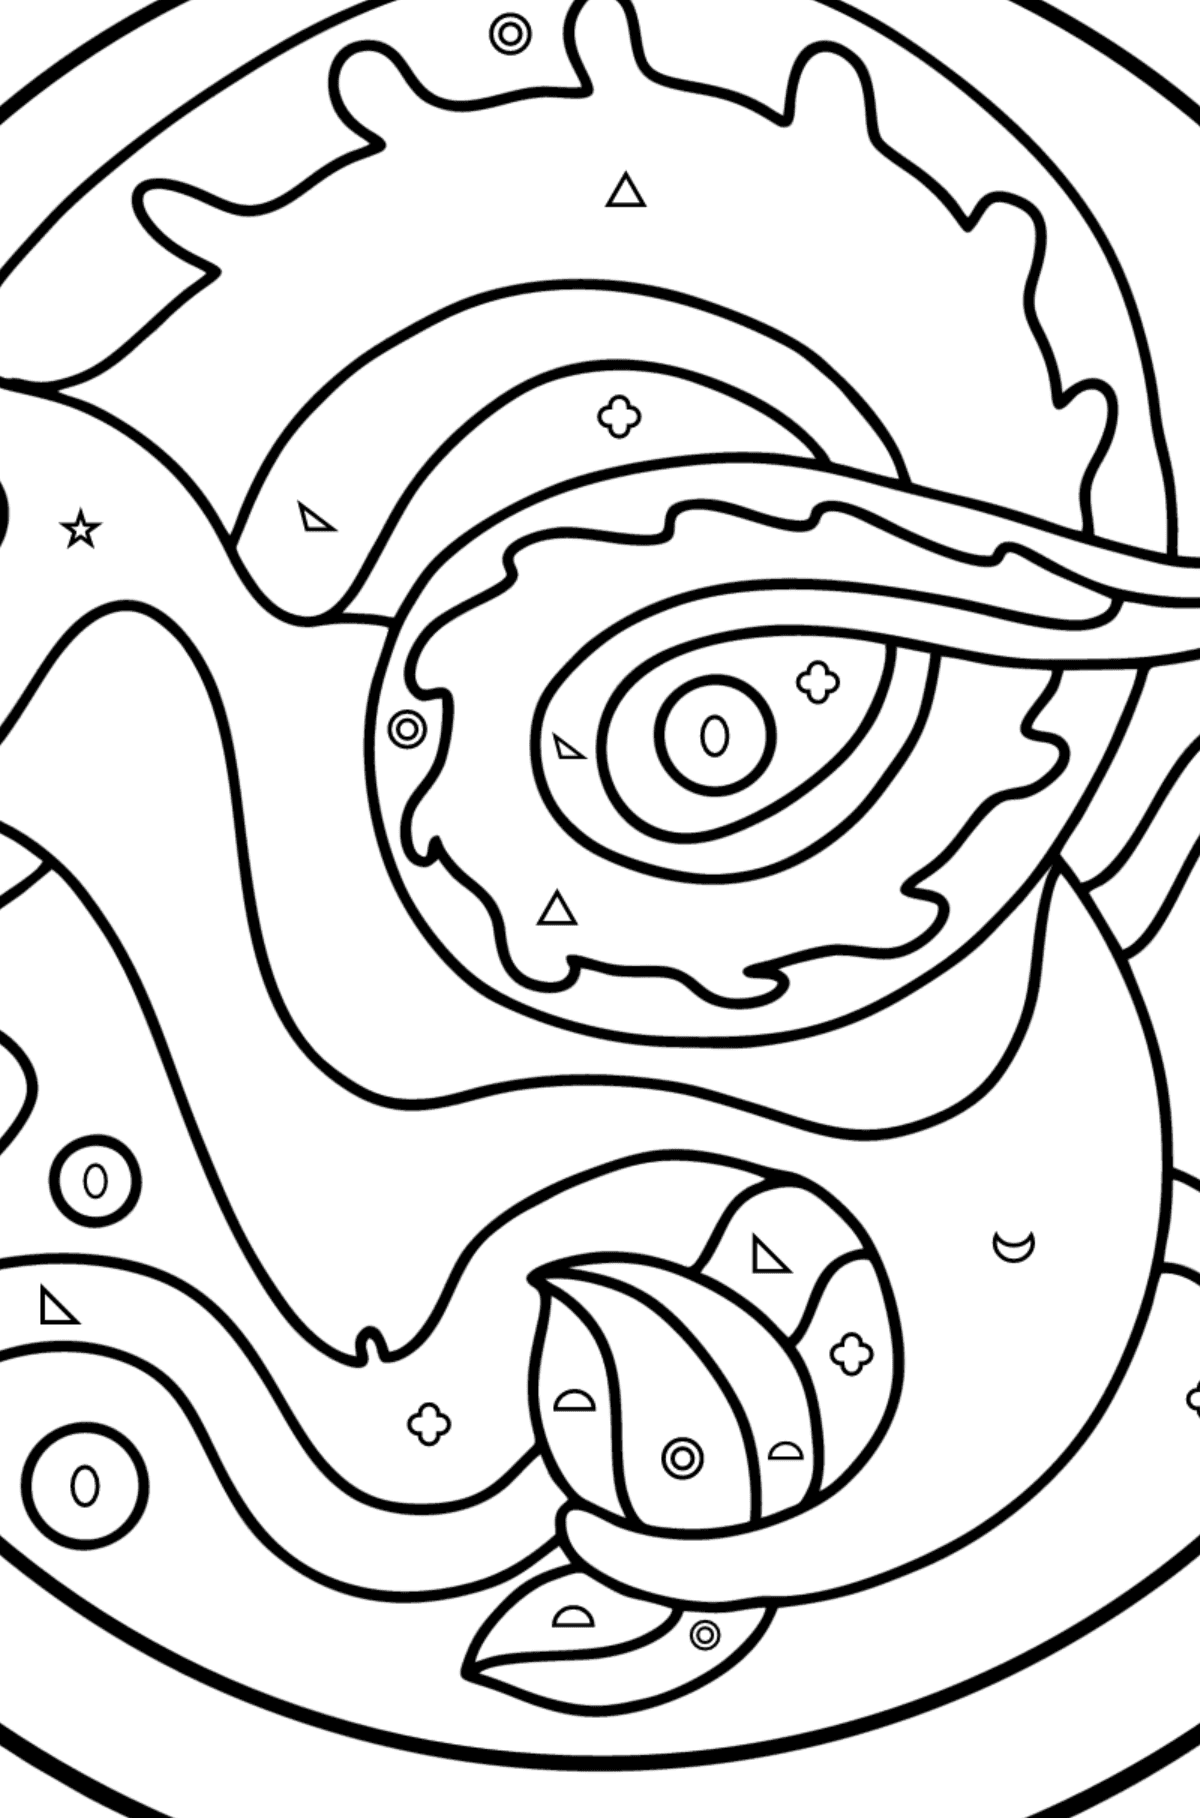 Coloring page for kids - Capricorn zodiac sign - Coloring by Geometric Shapes for Kids